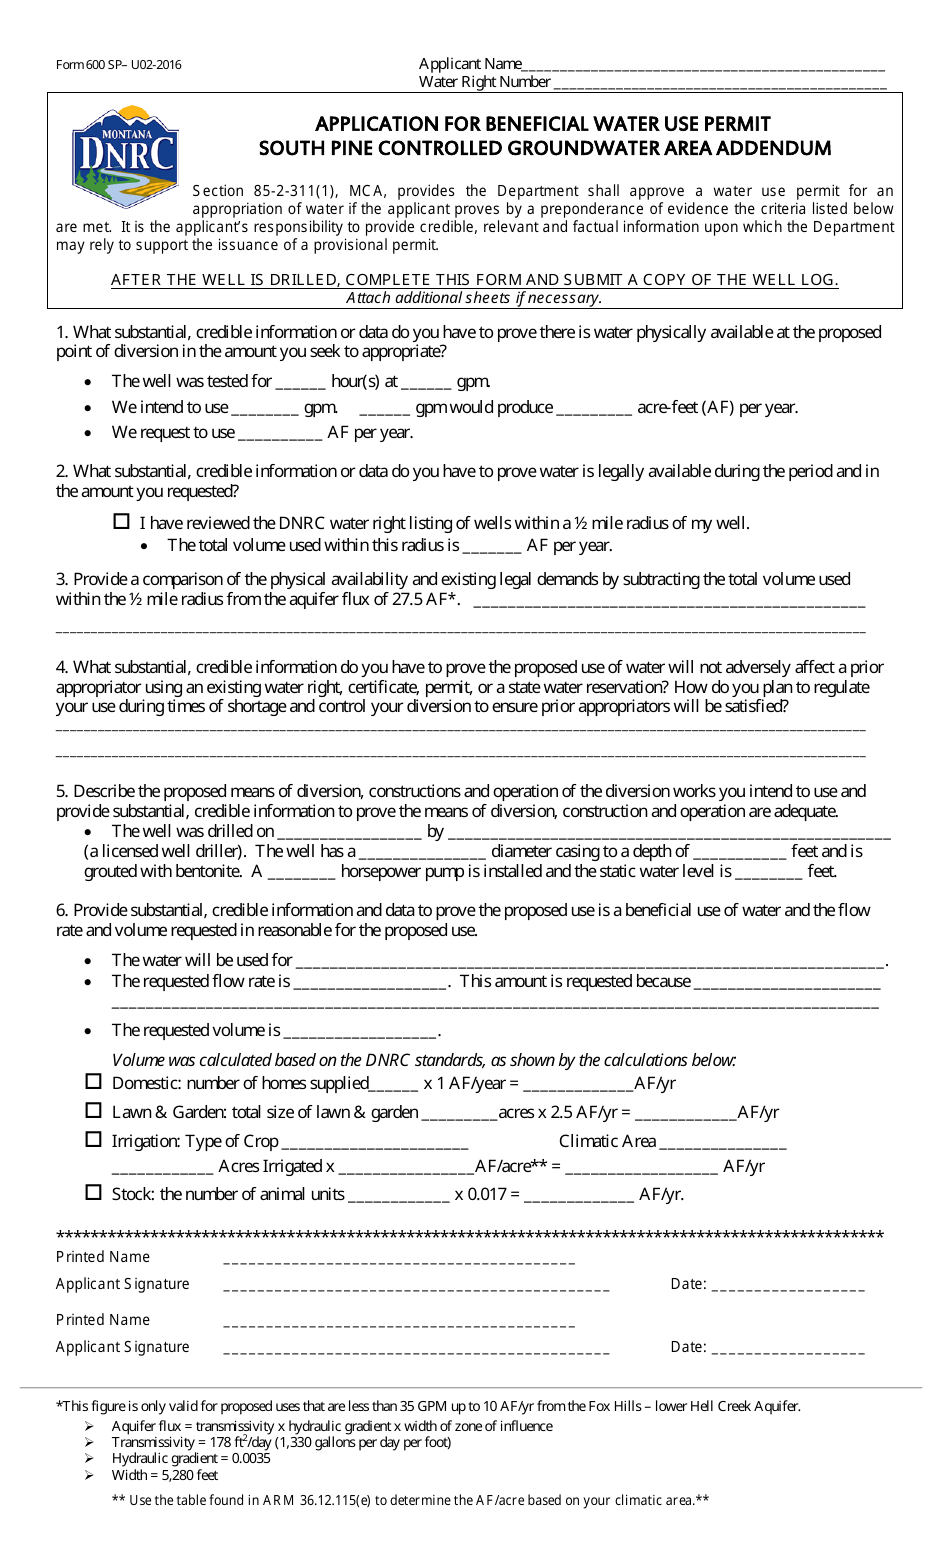 Form 600 SP Application for Beneficial Water Use Permit - South Pine Controlled Groundwater Area Addendum - Montana, Page 1